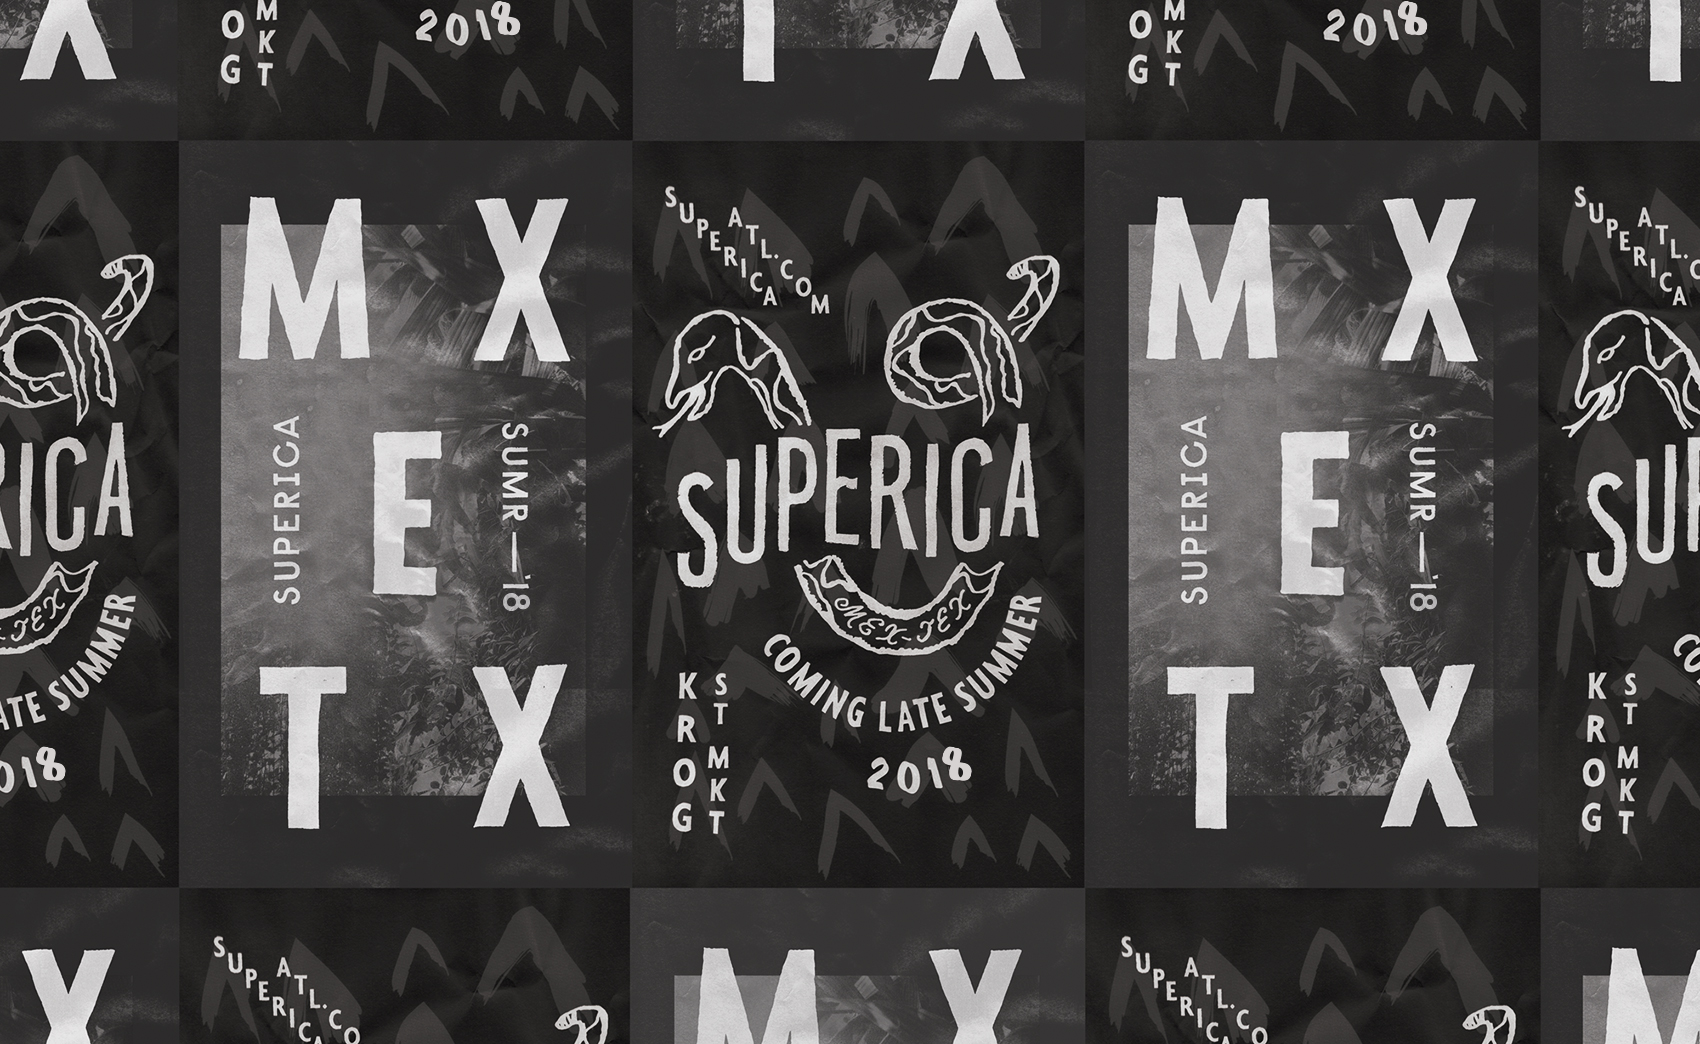 Superica_posters